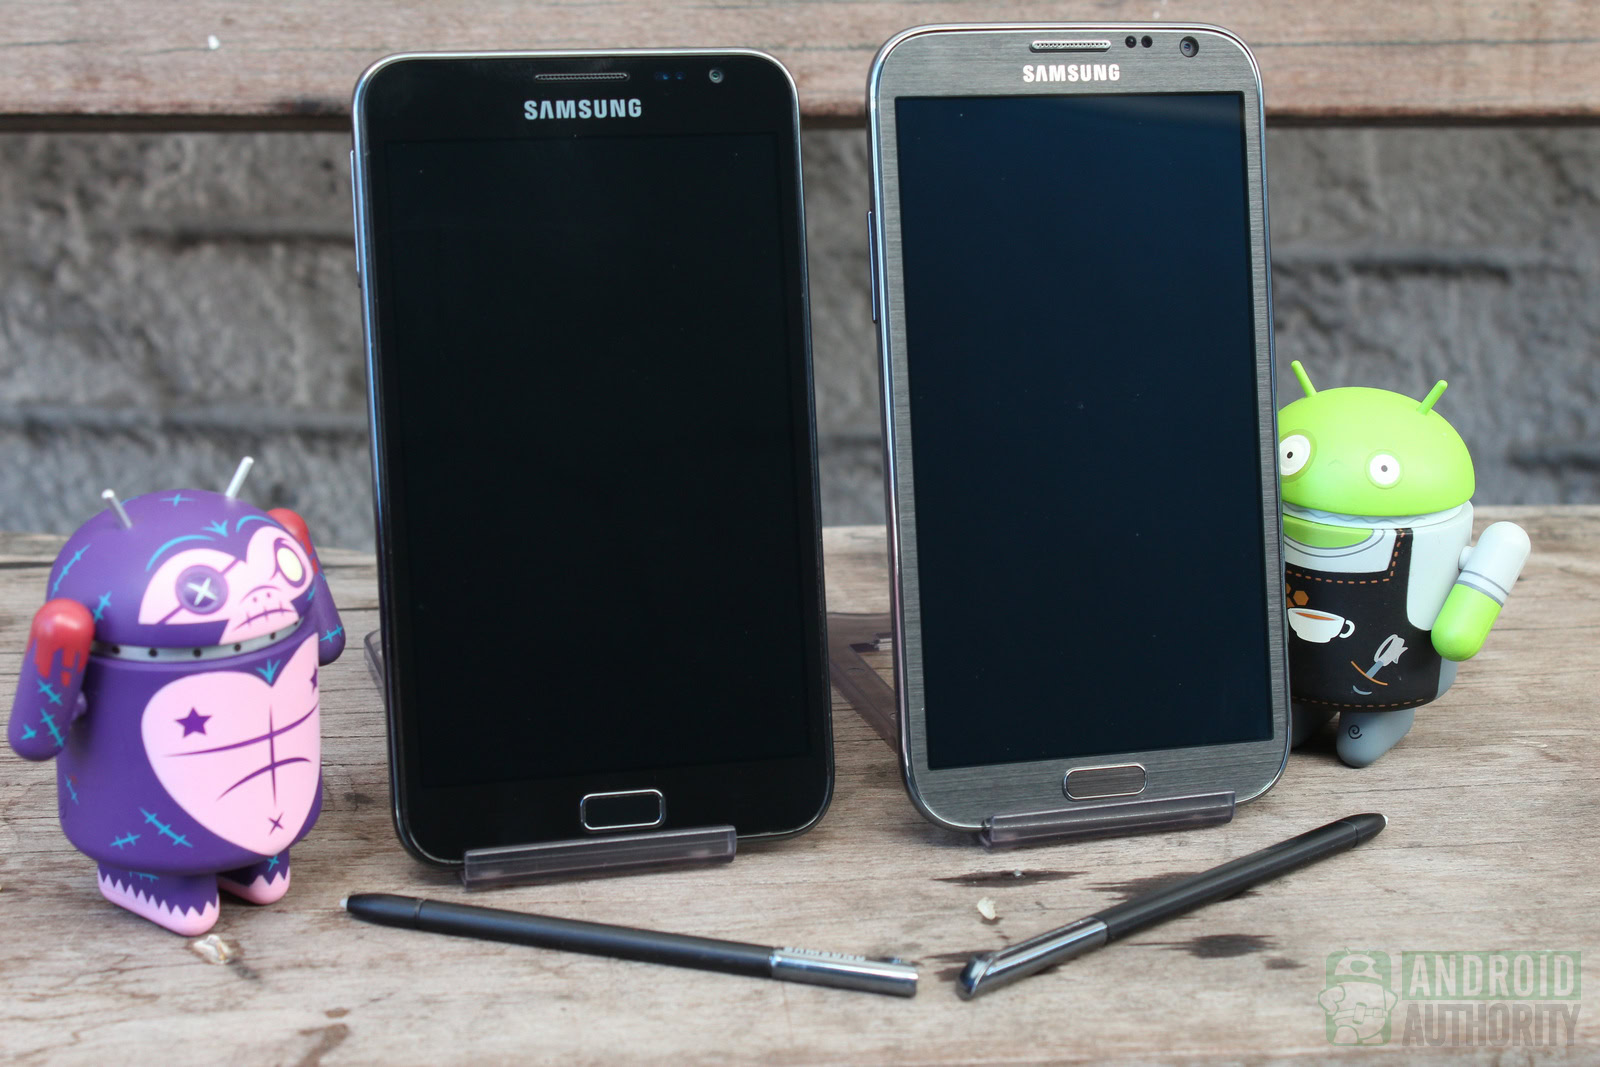 Galaxy Note and Galaxy Note 2